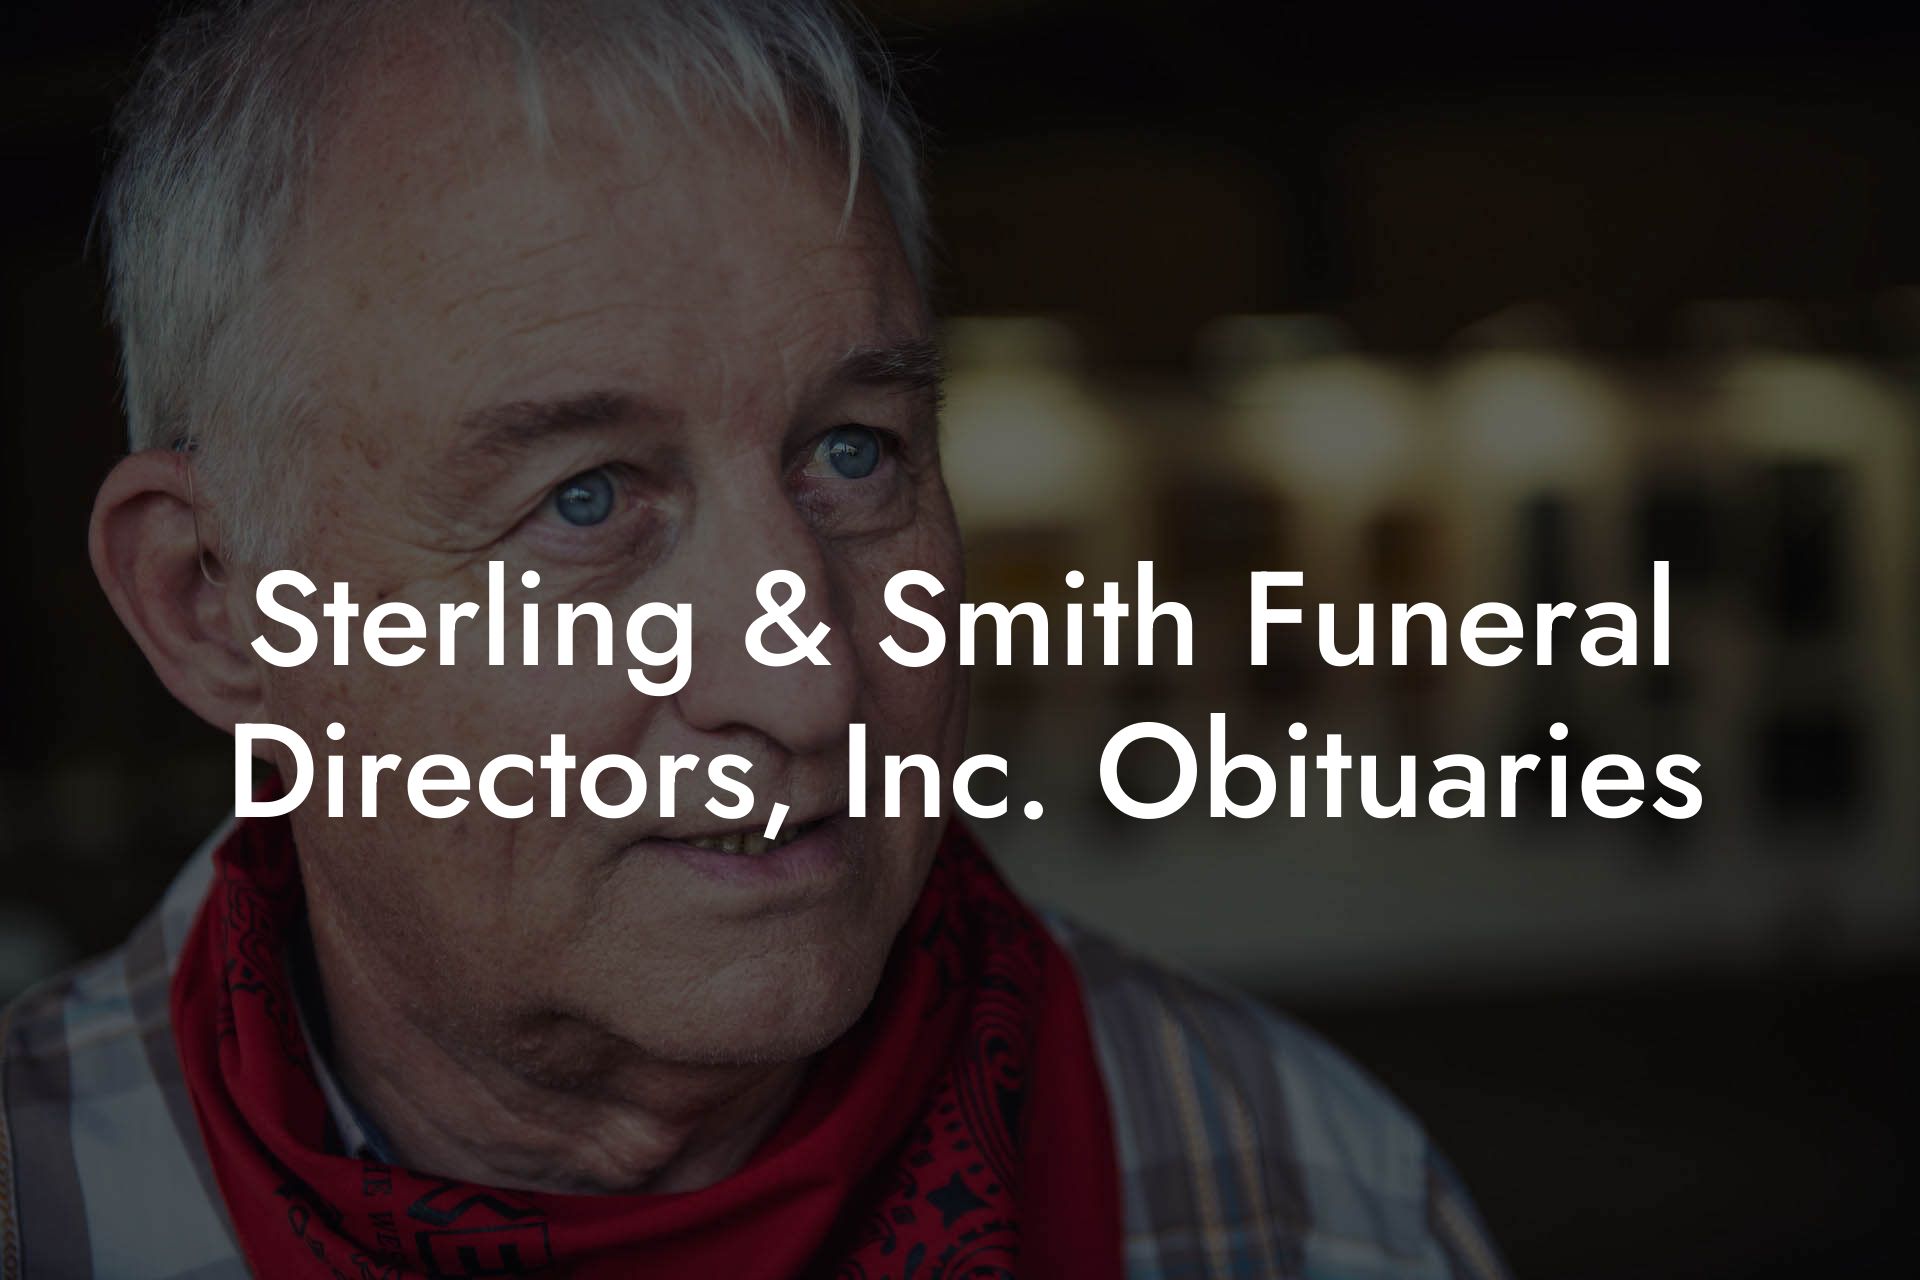 Sterling & Smith Funeral Directors, Inc. Obituaries